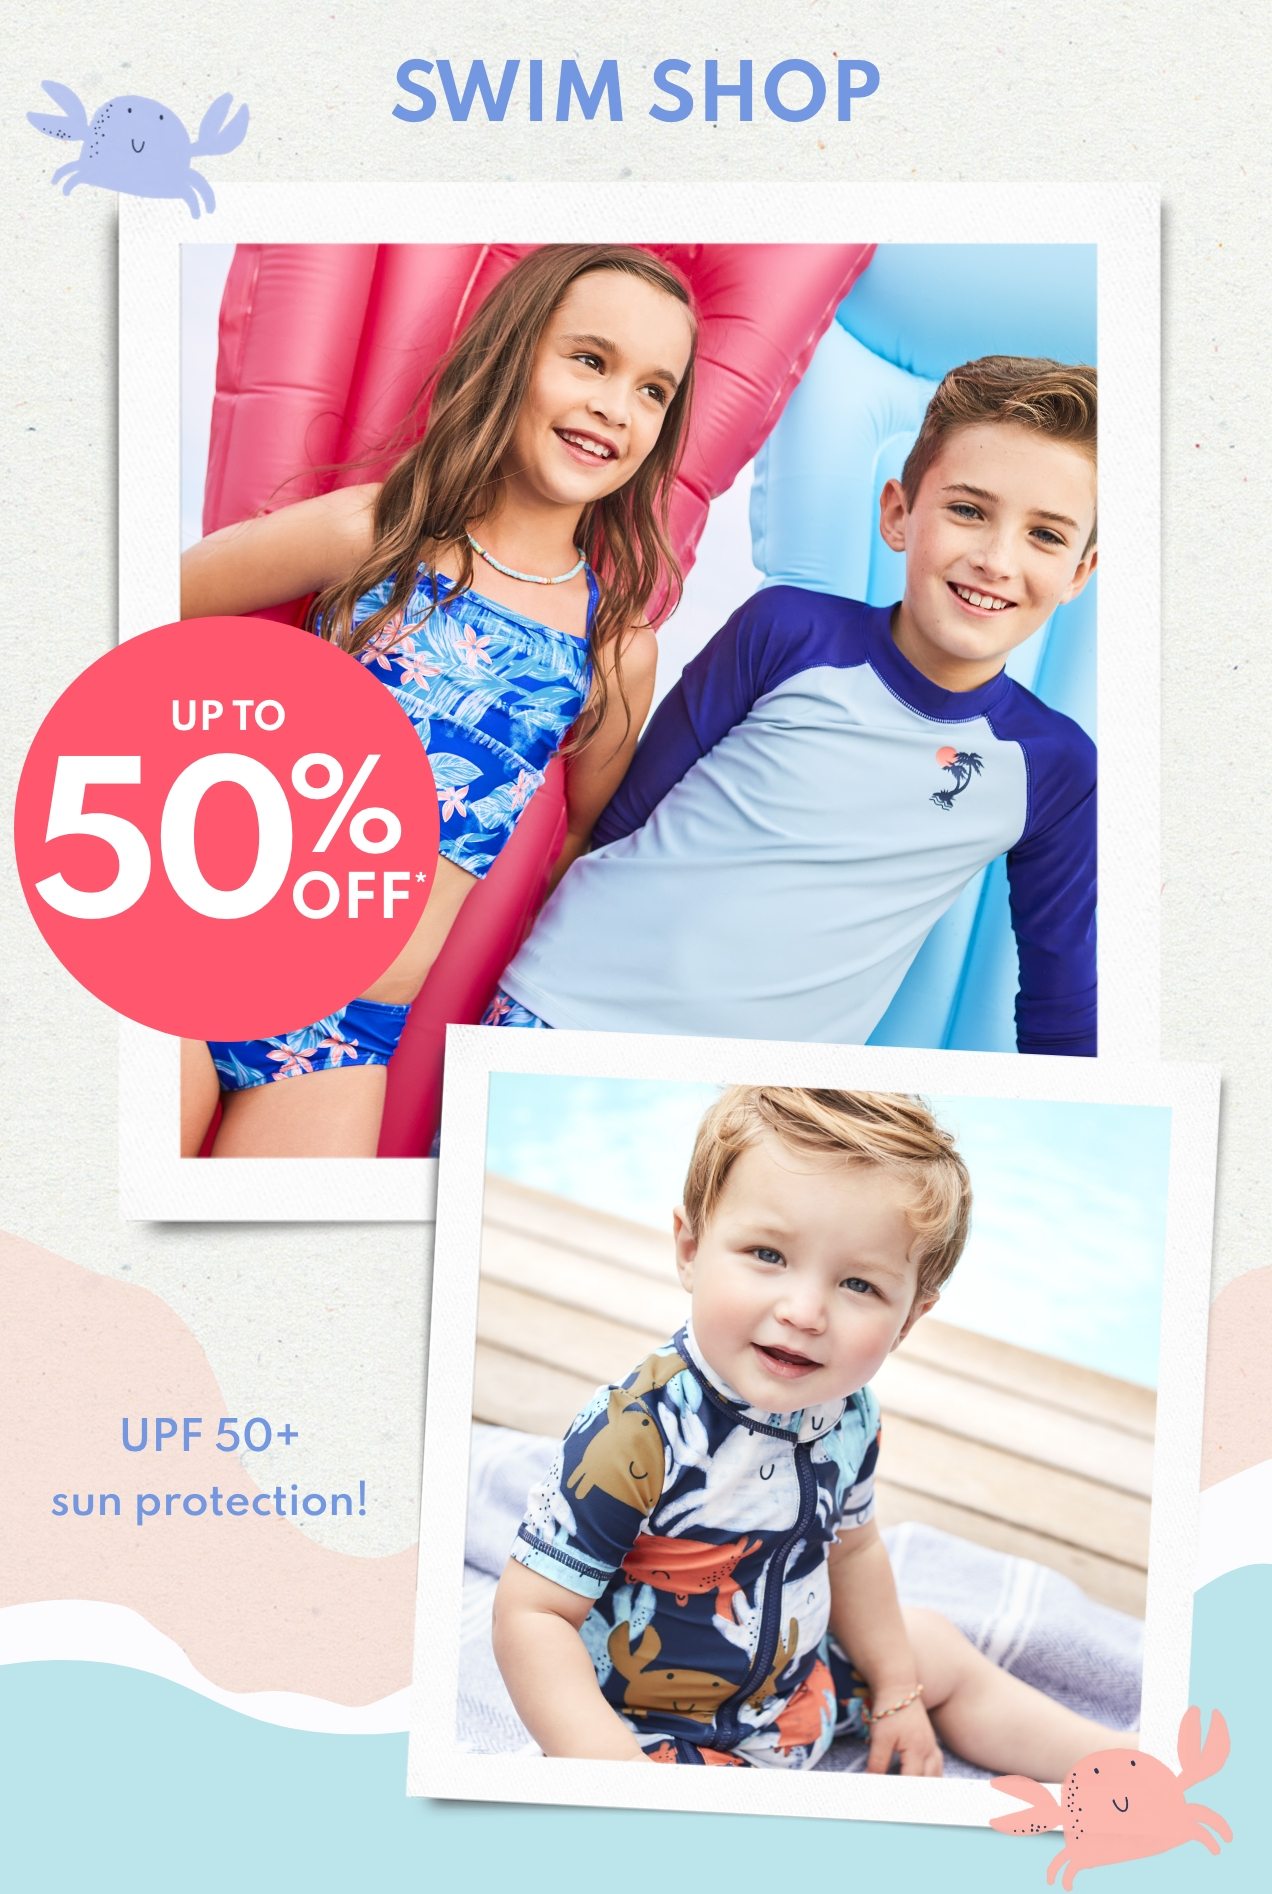 SWIM SHOP | UP TO 50% OFF* | UPF 50+ sun protection! 